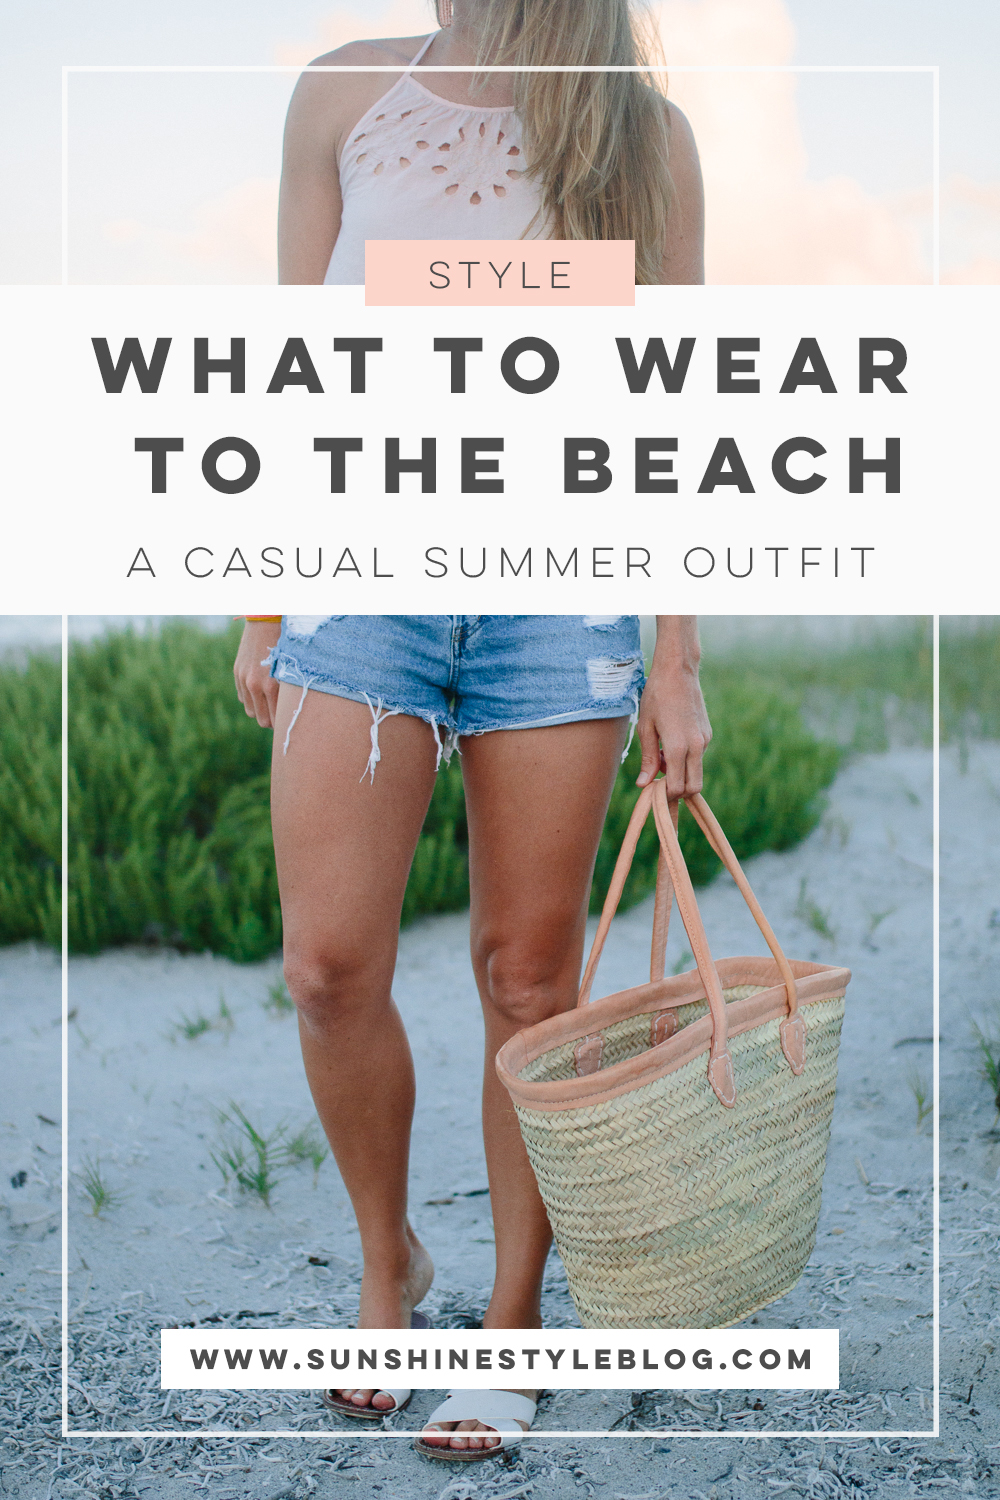 What to Wear to the Beach: A Casual Summer Outfit featuring an Aerie Crop Top, Denim Shorts, Sandals, Statement Earrings and a Beach Bag | Sunshine Style